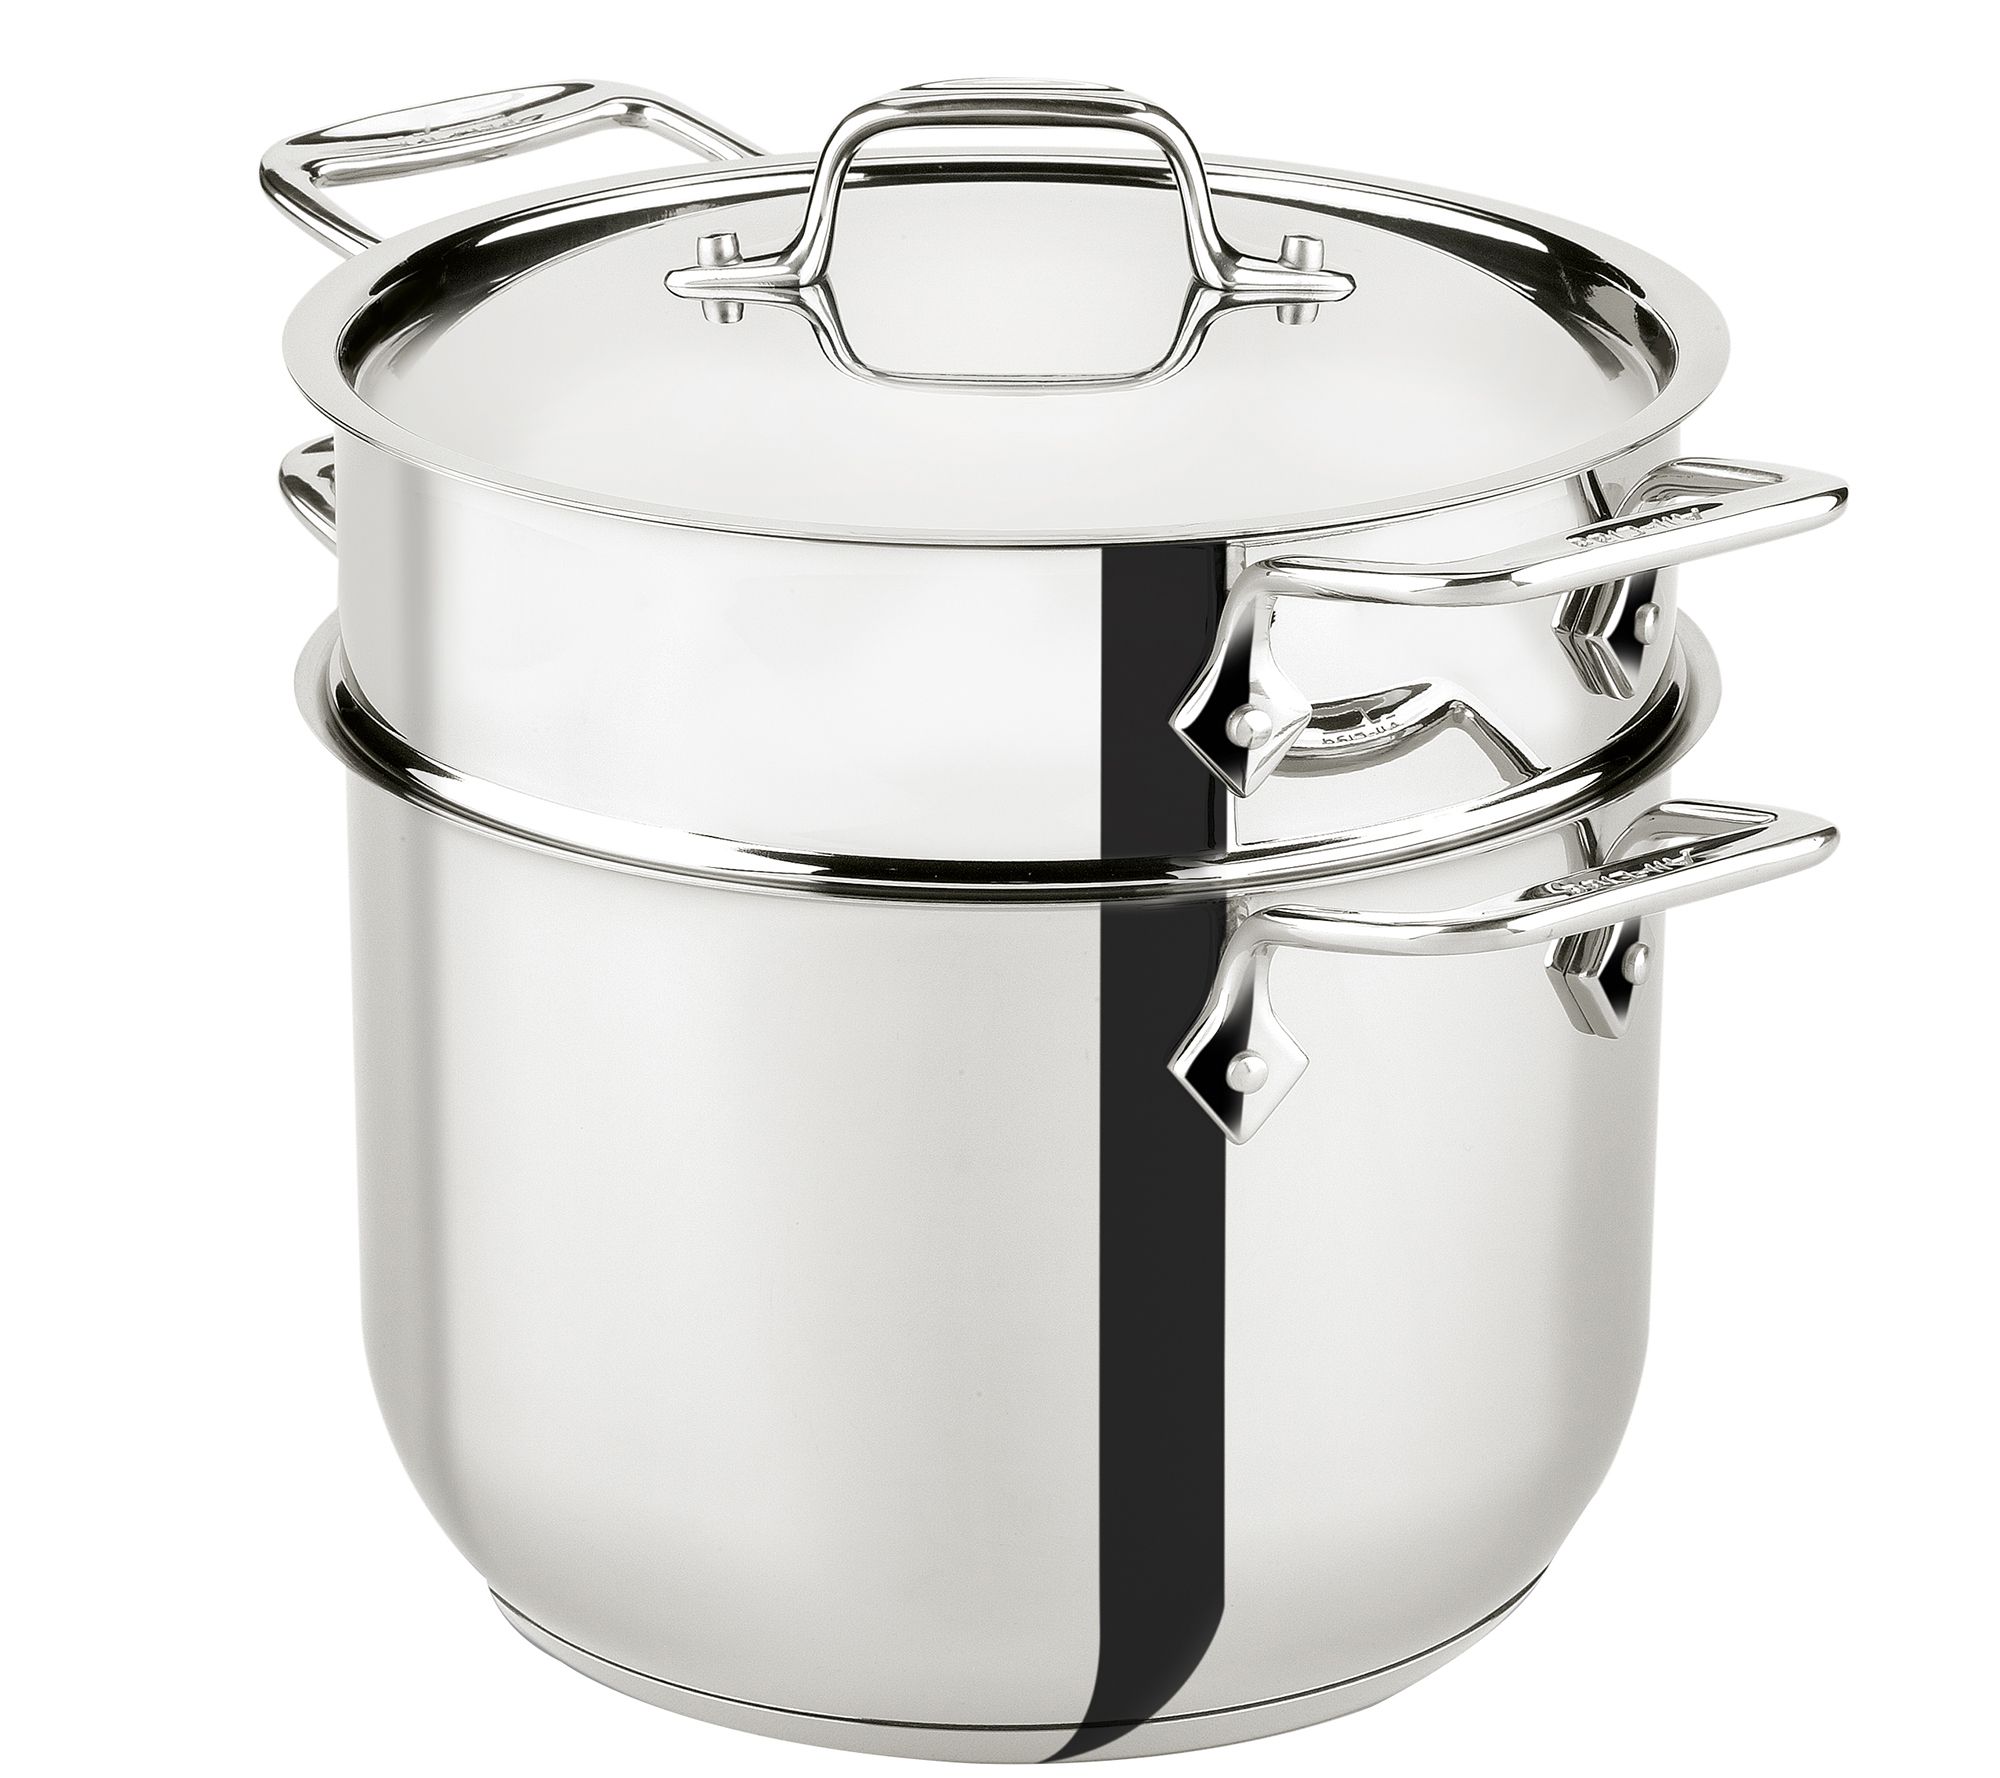 All-Clad Stainless Steel Stockpot with Pasta & Steamer Inserts, 8 qt.